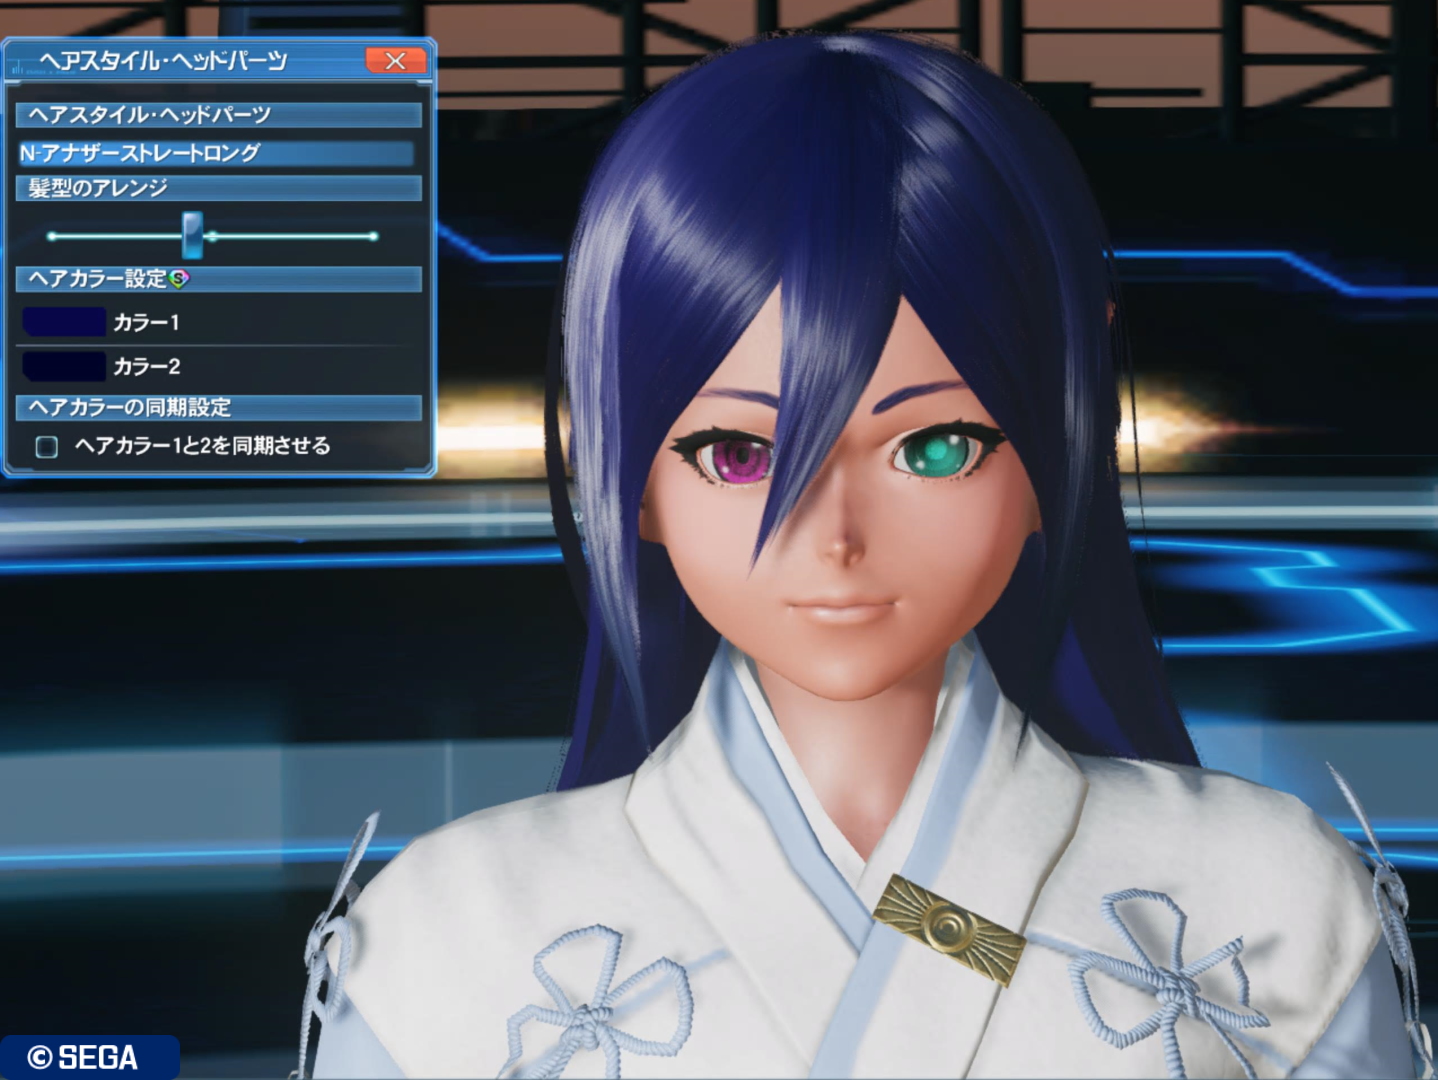 Pso2 N アナザーストレートロング 幻想紀行